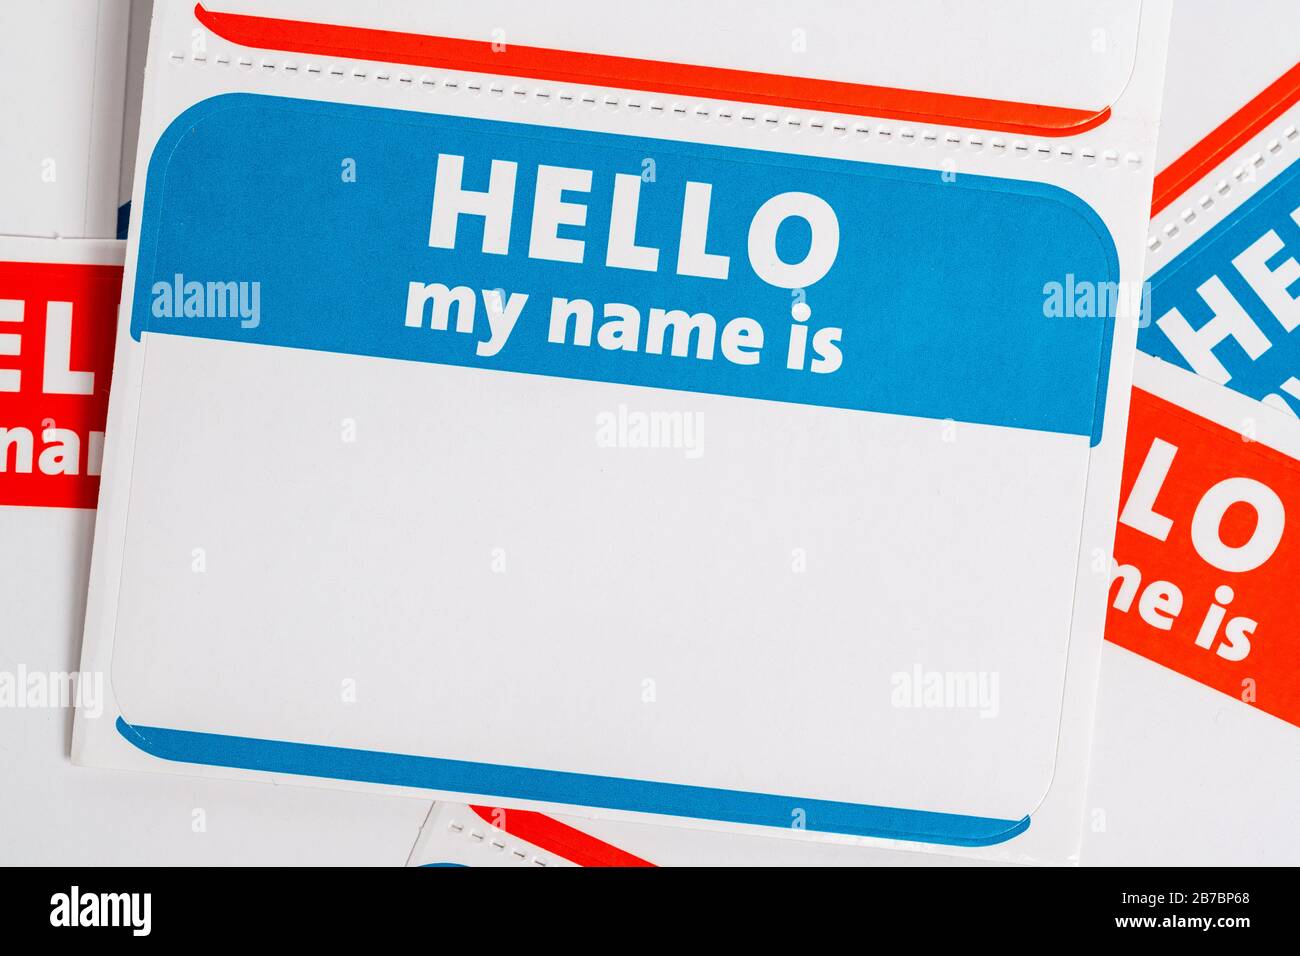 Hello my name is name badge paper aticker Stock Photo